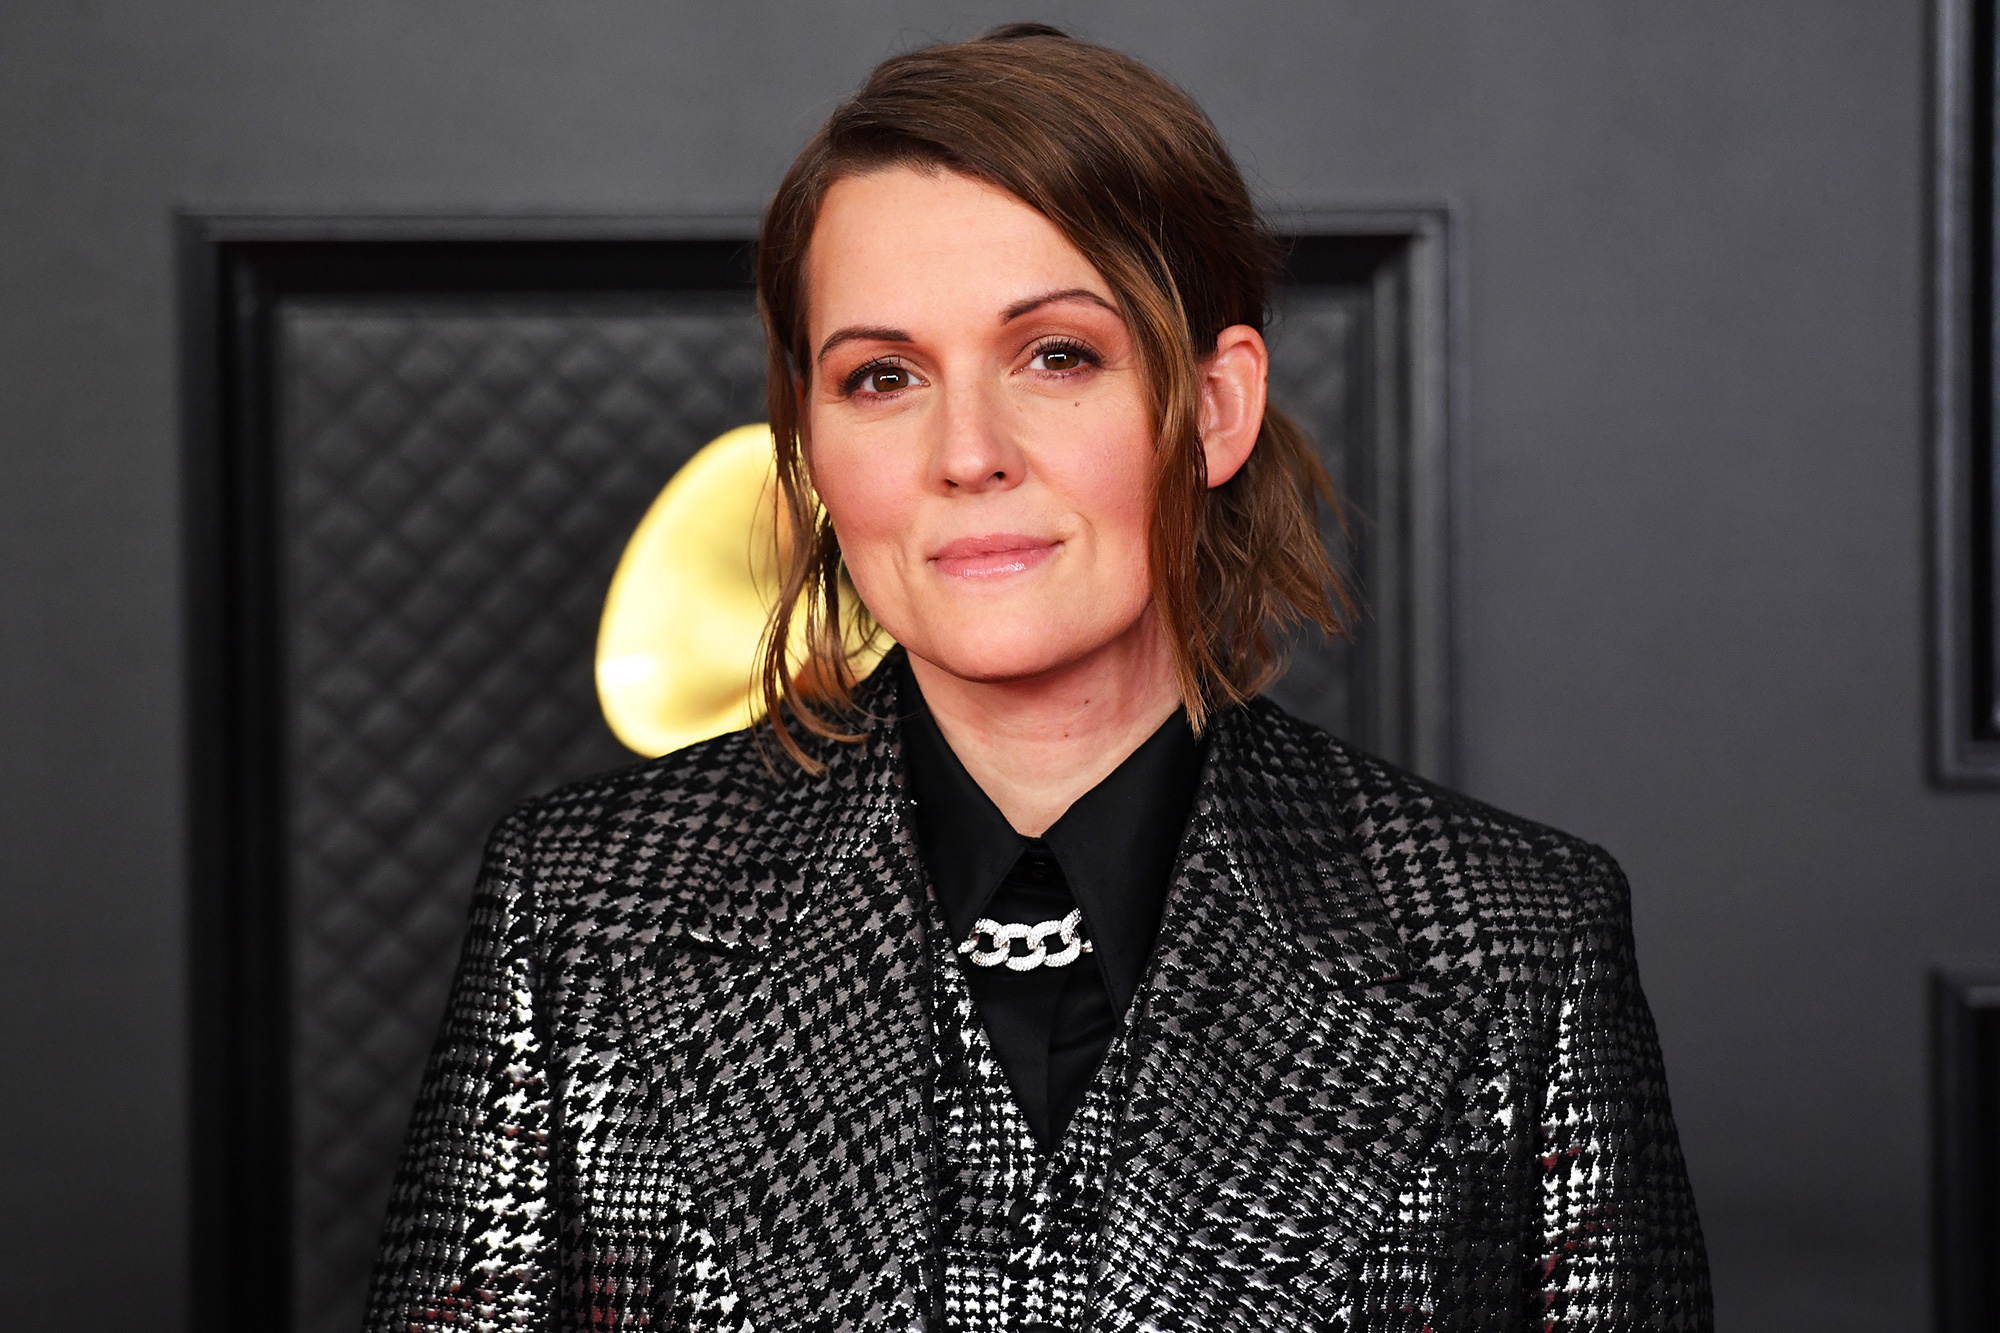 Brandi Carlile, Disappointment at Grammys, Song category change, Musical recognition, 2000x1340 HD Desktop